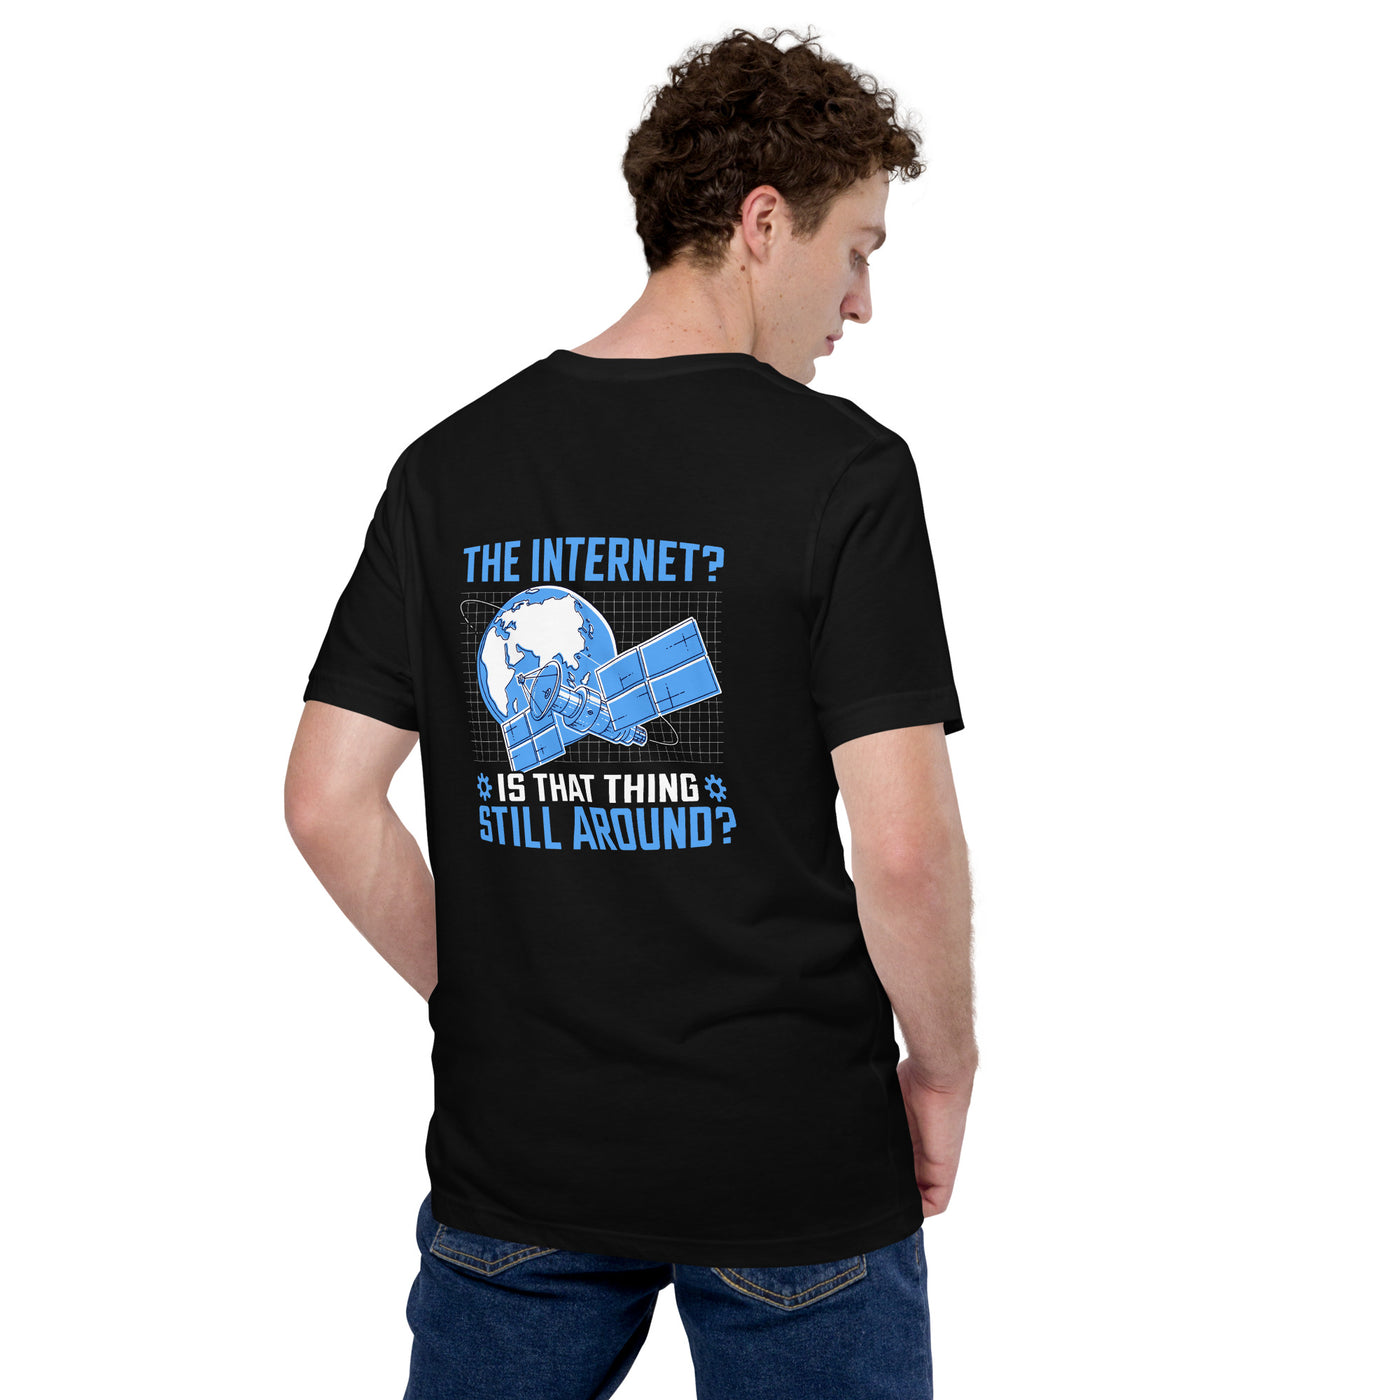 The Internet? Is that Thing Still Around? Unisex t-shirt  ( Back Print )